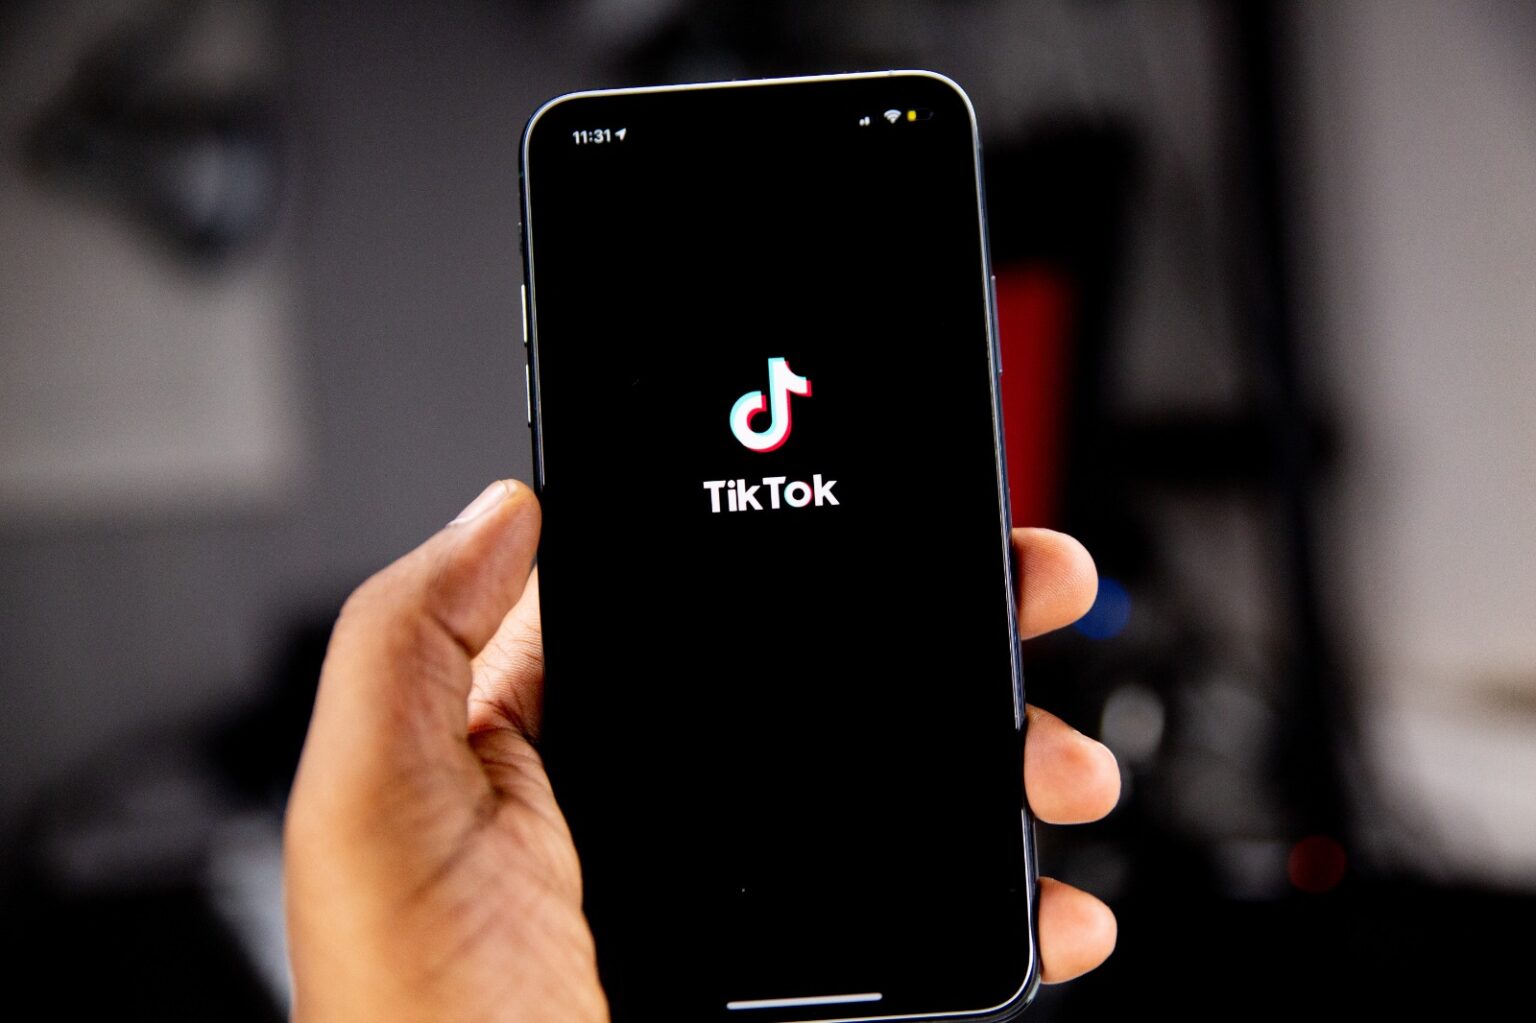 SOME INSTAGRAM USERS COMPLAINING IT IS BECOMING TOO MUCH LIKE TIKTOK